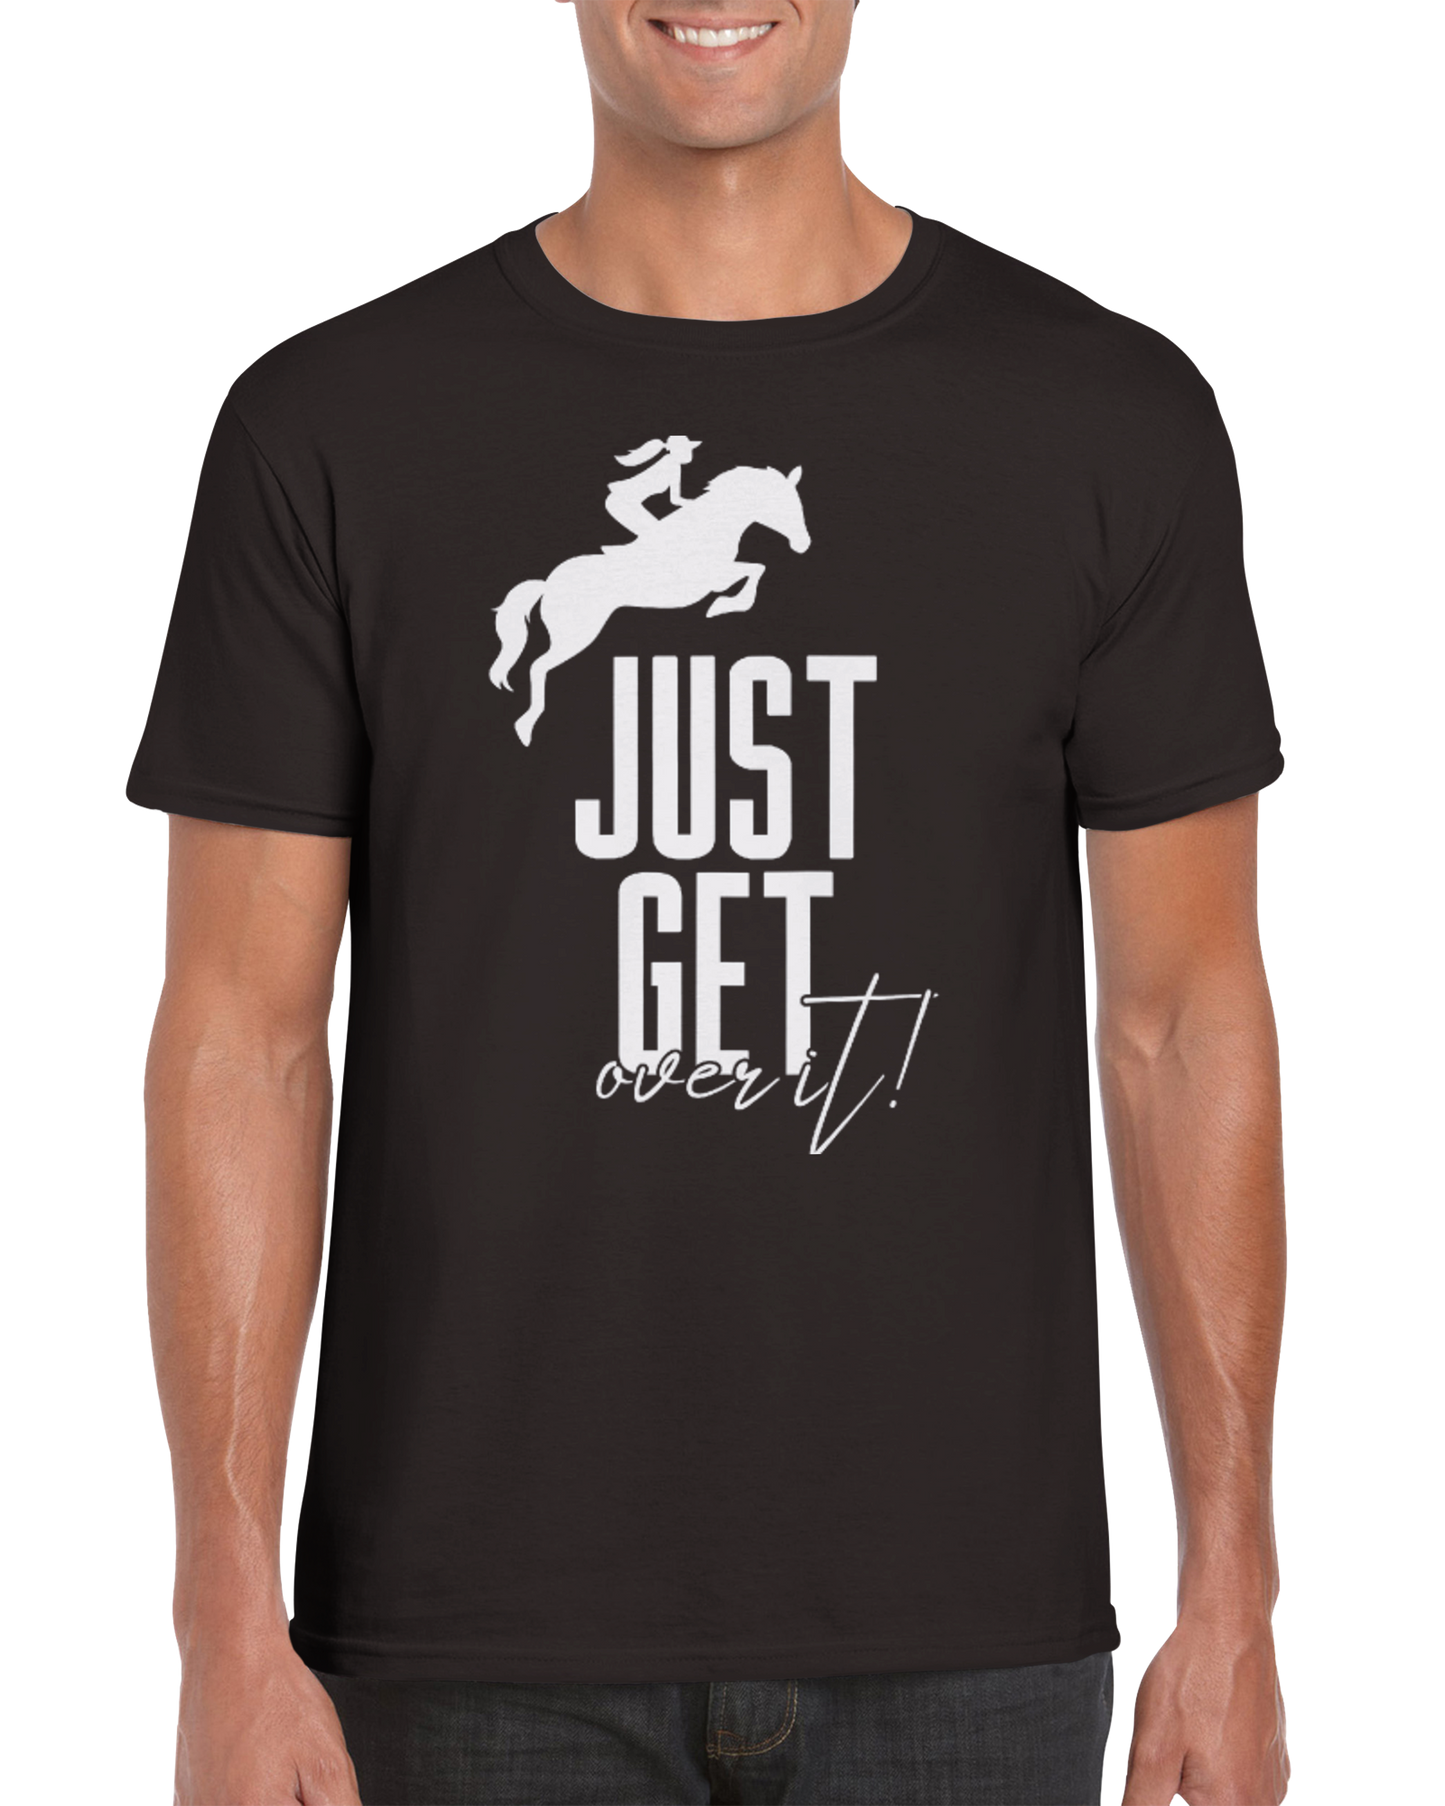 Hand Drawn Horse || Unisex T-shirt - Design: "Get over it"; Static Design; Personalizable Back Text